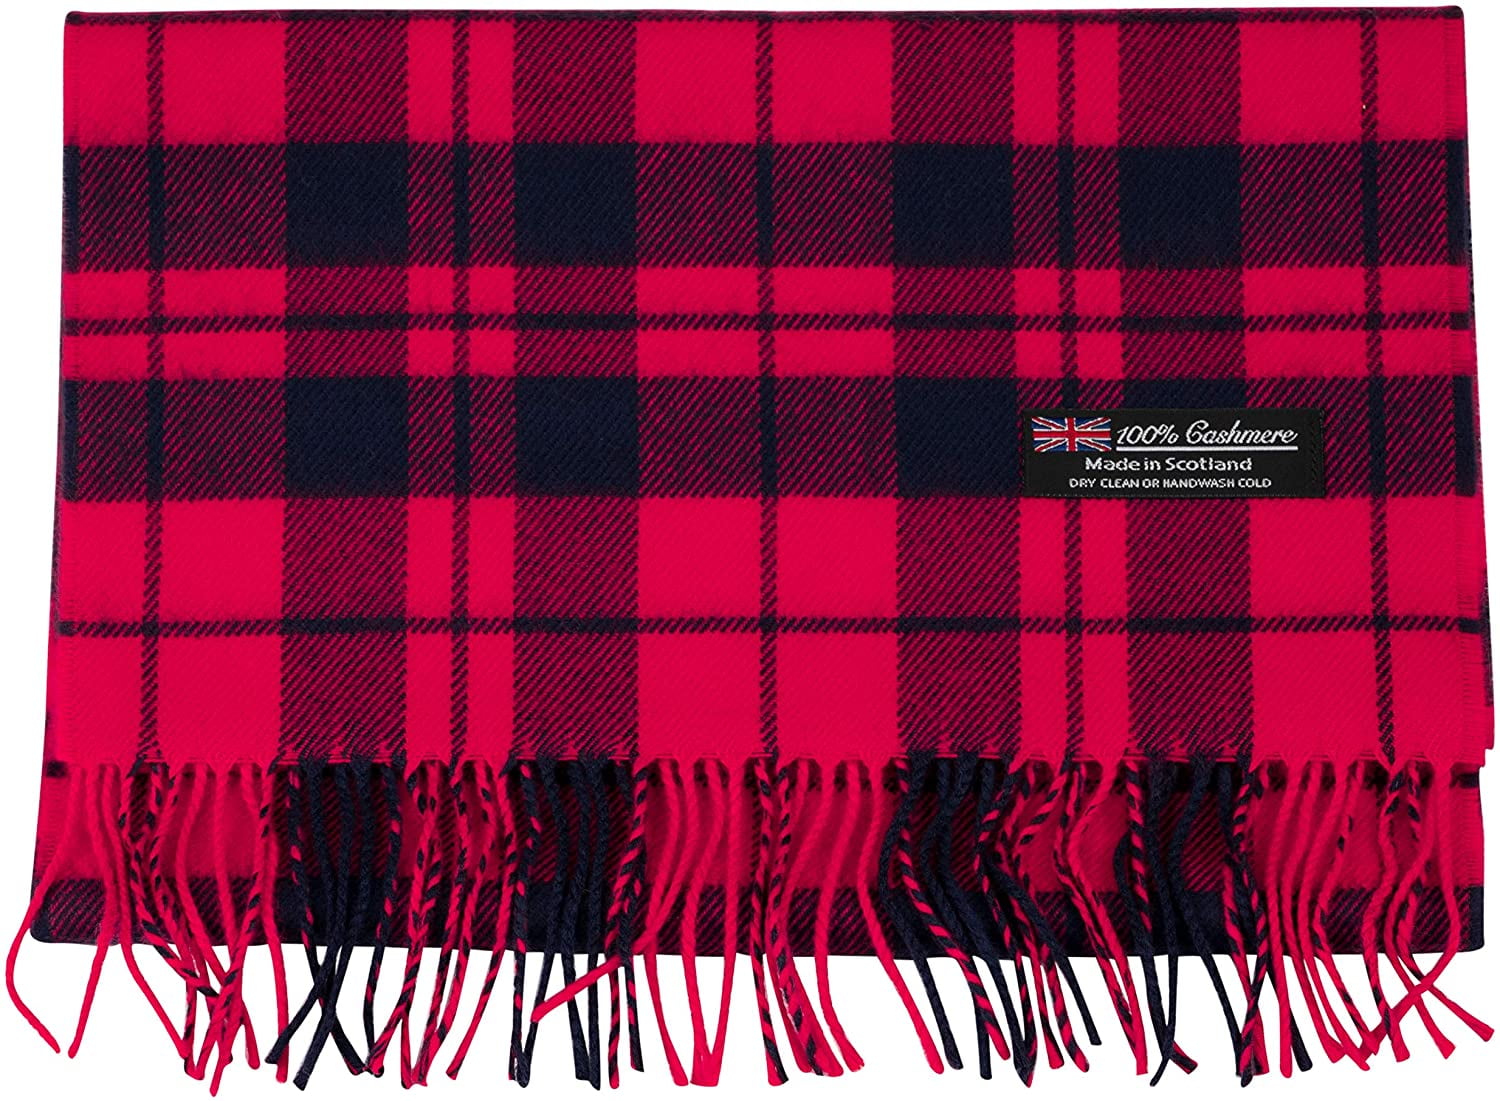 2 PLY 100% Cashmere Scarf Winter City Fashion Collection Made in Scotland Warm Soft Wool Solid Tartan Check Plaid Men Women 